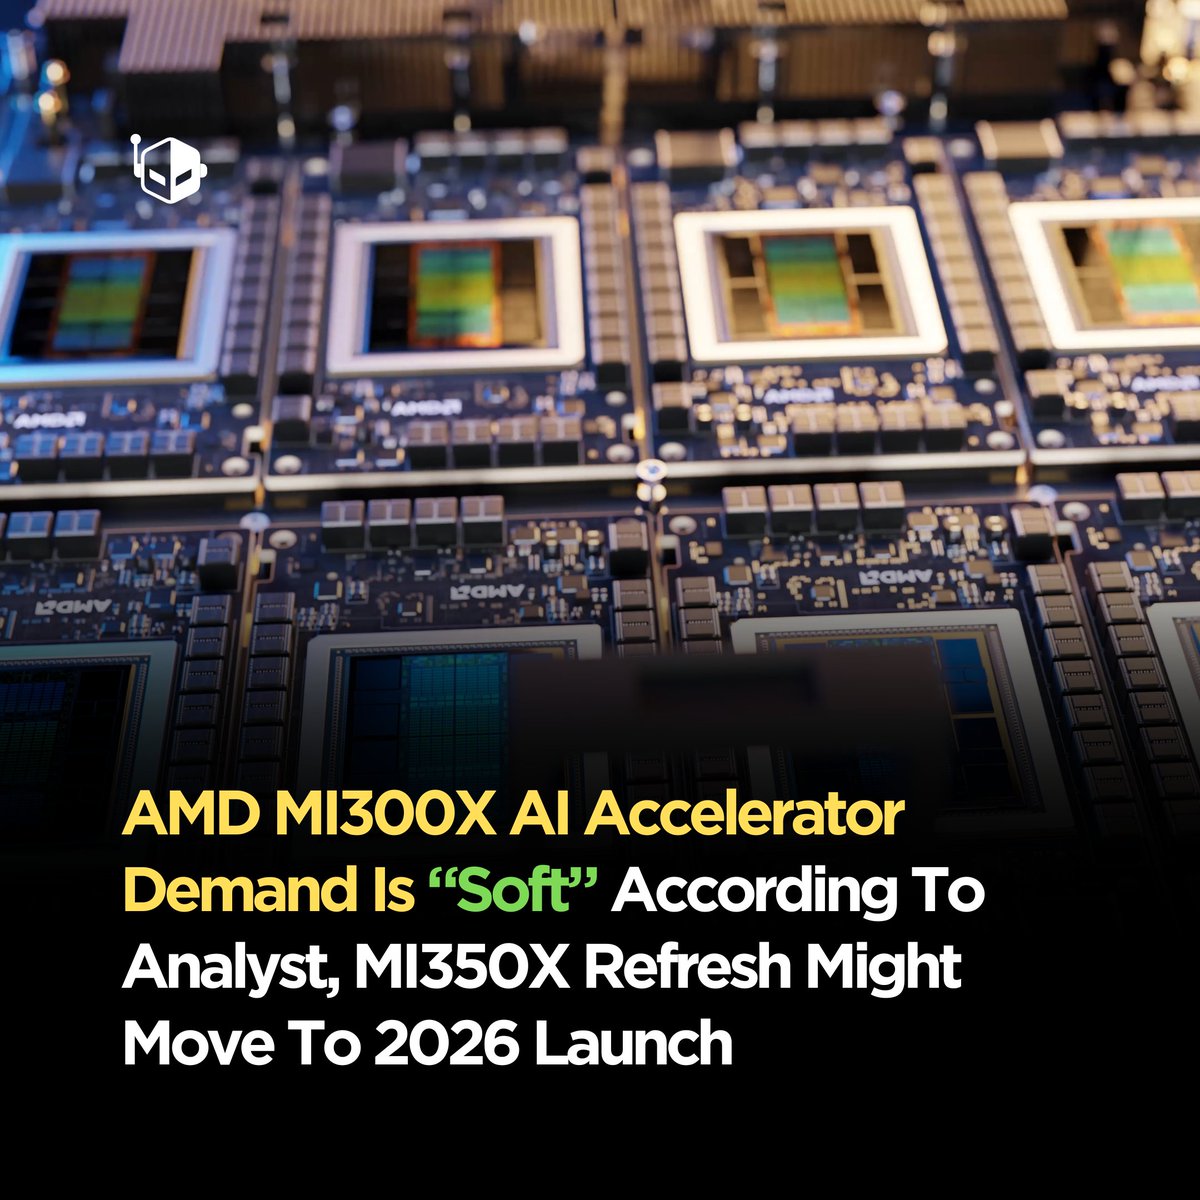 AMD is reportedly facing 'Soft' demand for its latest MI300X AI accelerator which might also push the refreshed MI350X back to 2026. wccftech.com/amd-mi300x-ai-…